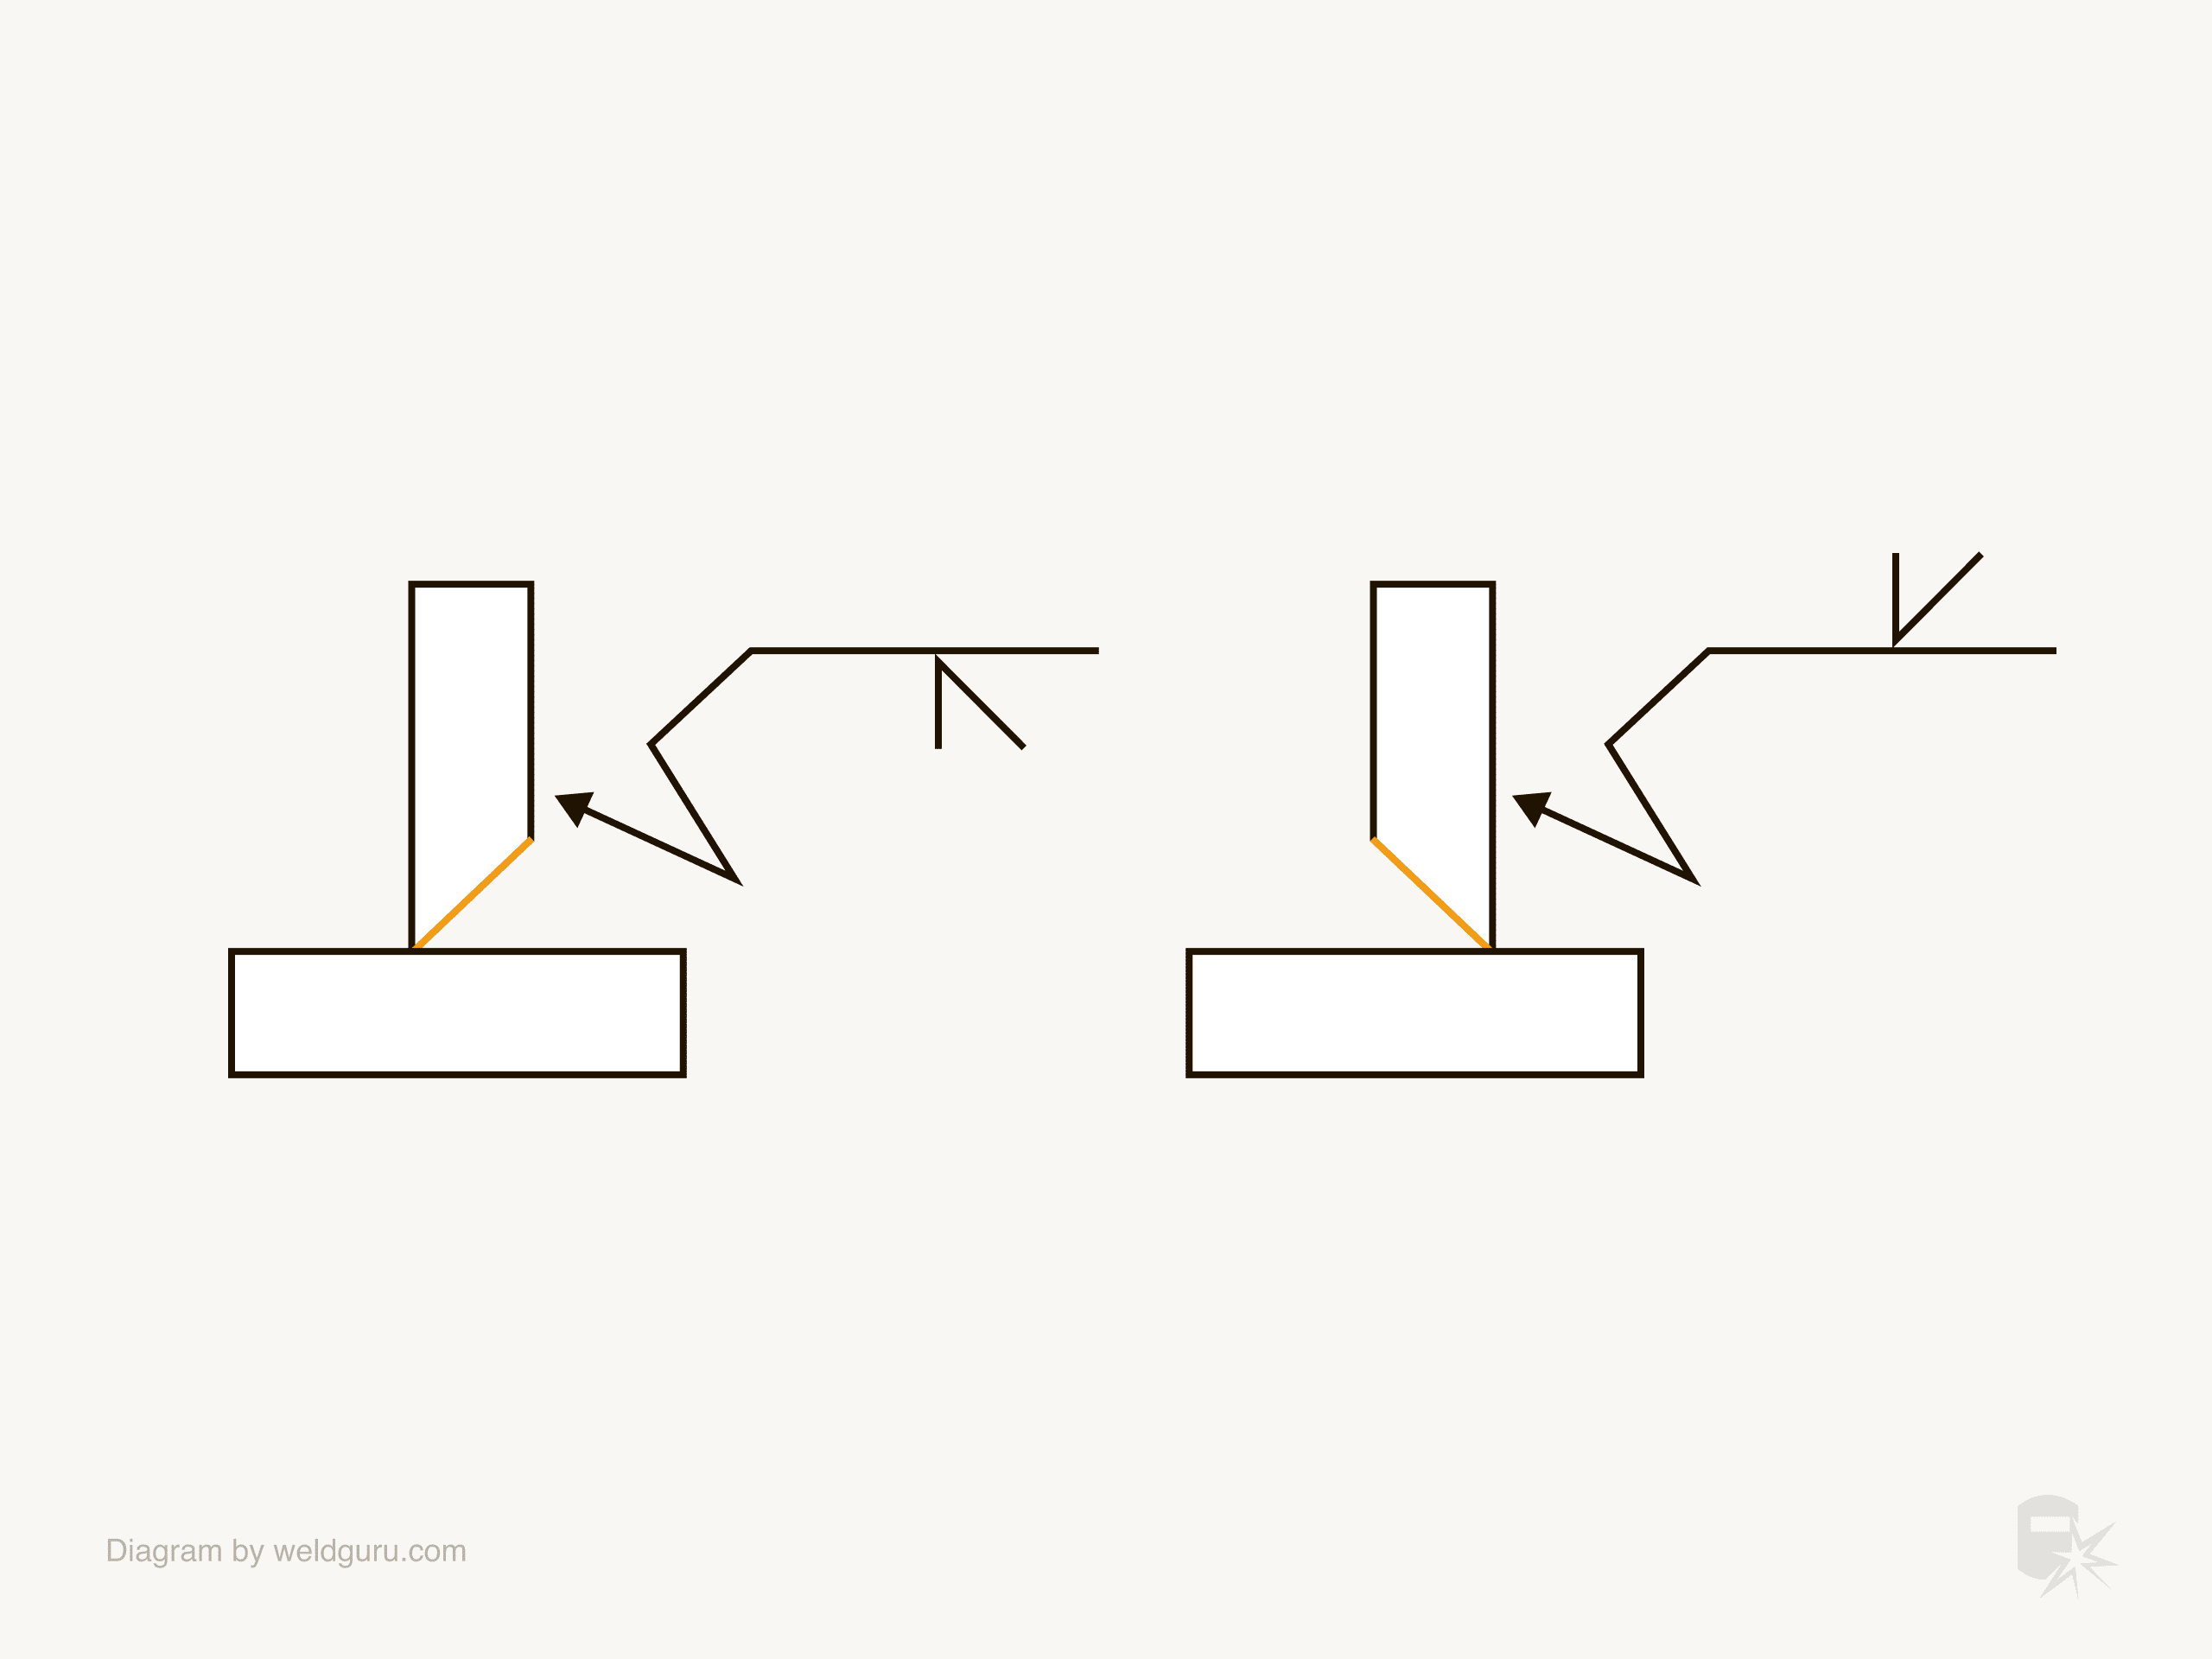 groove weld symbols in other positions